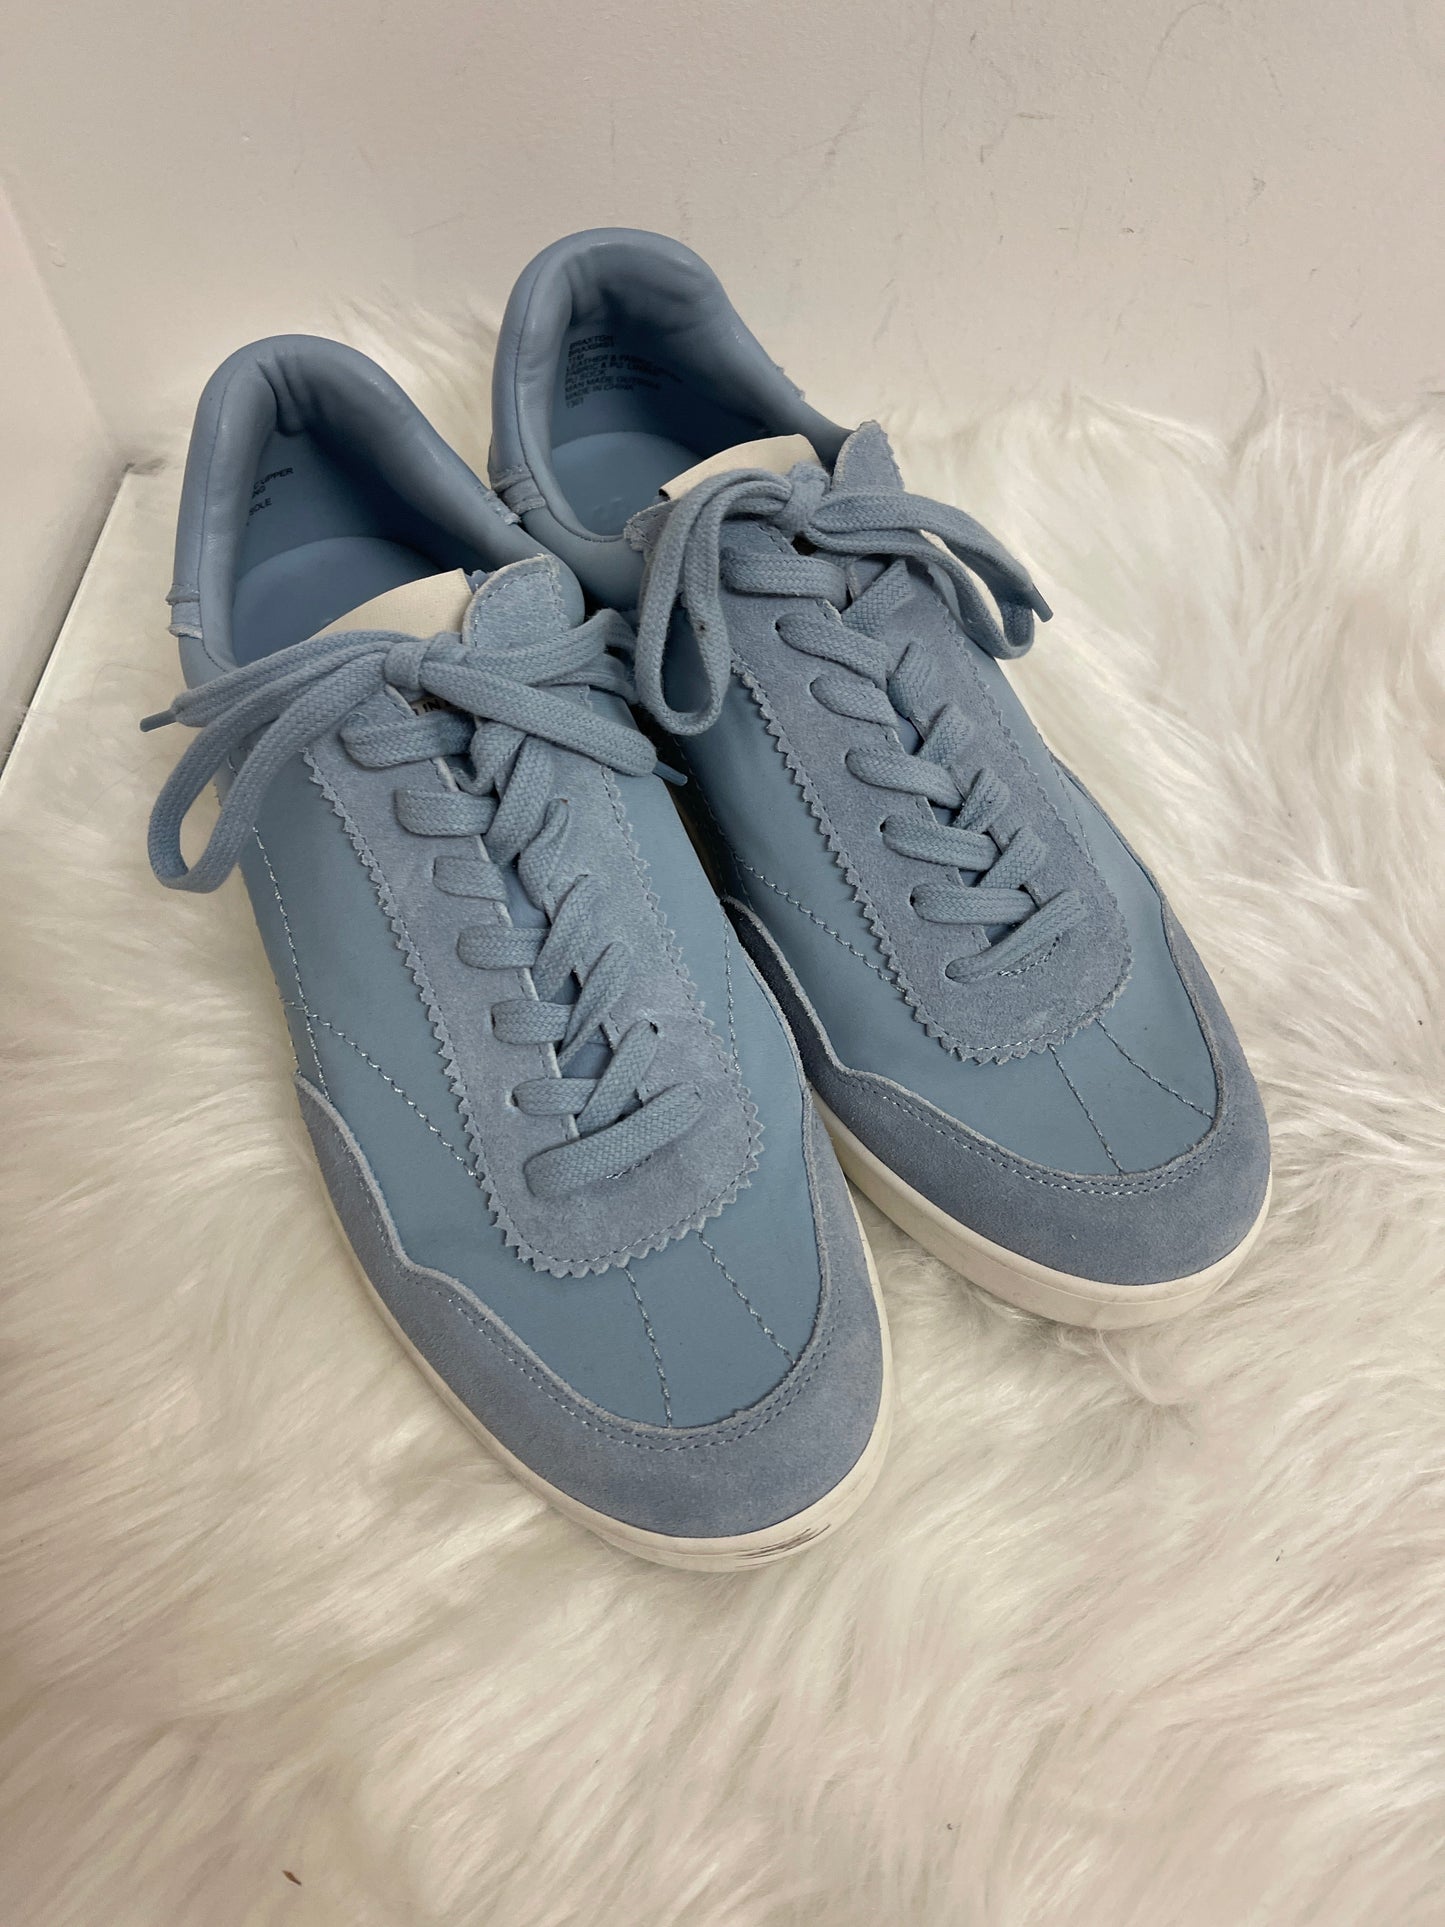 Blue Shoes Sneakers Steve Madden, Size 11